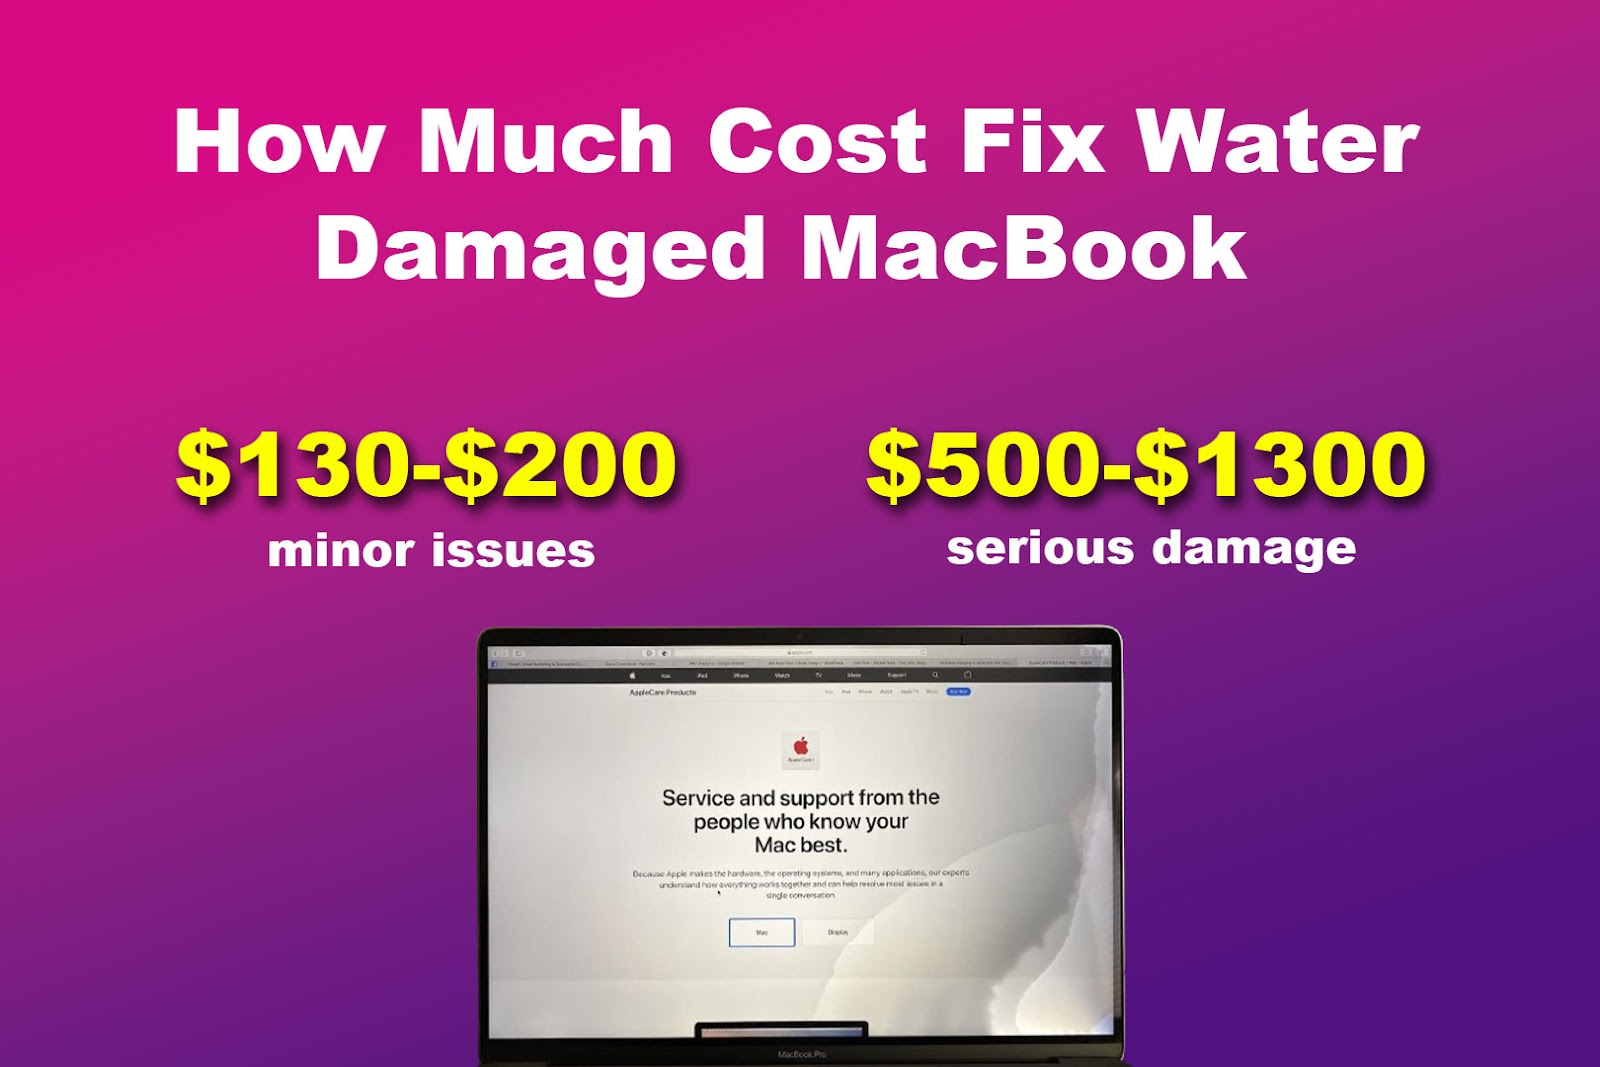 How Much Cost Fix Water Damaged MacBook